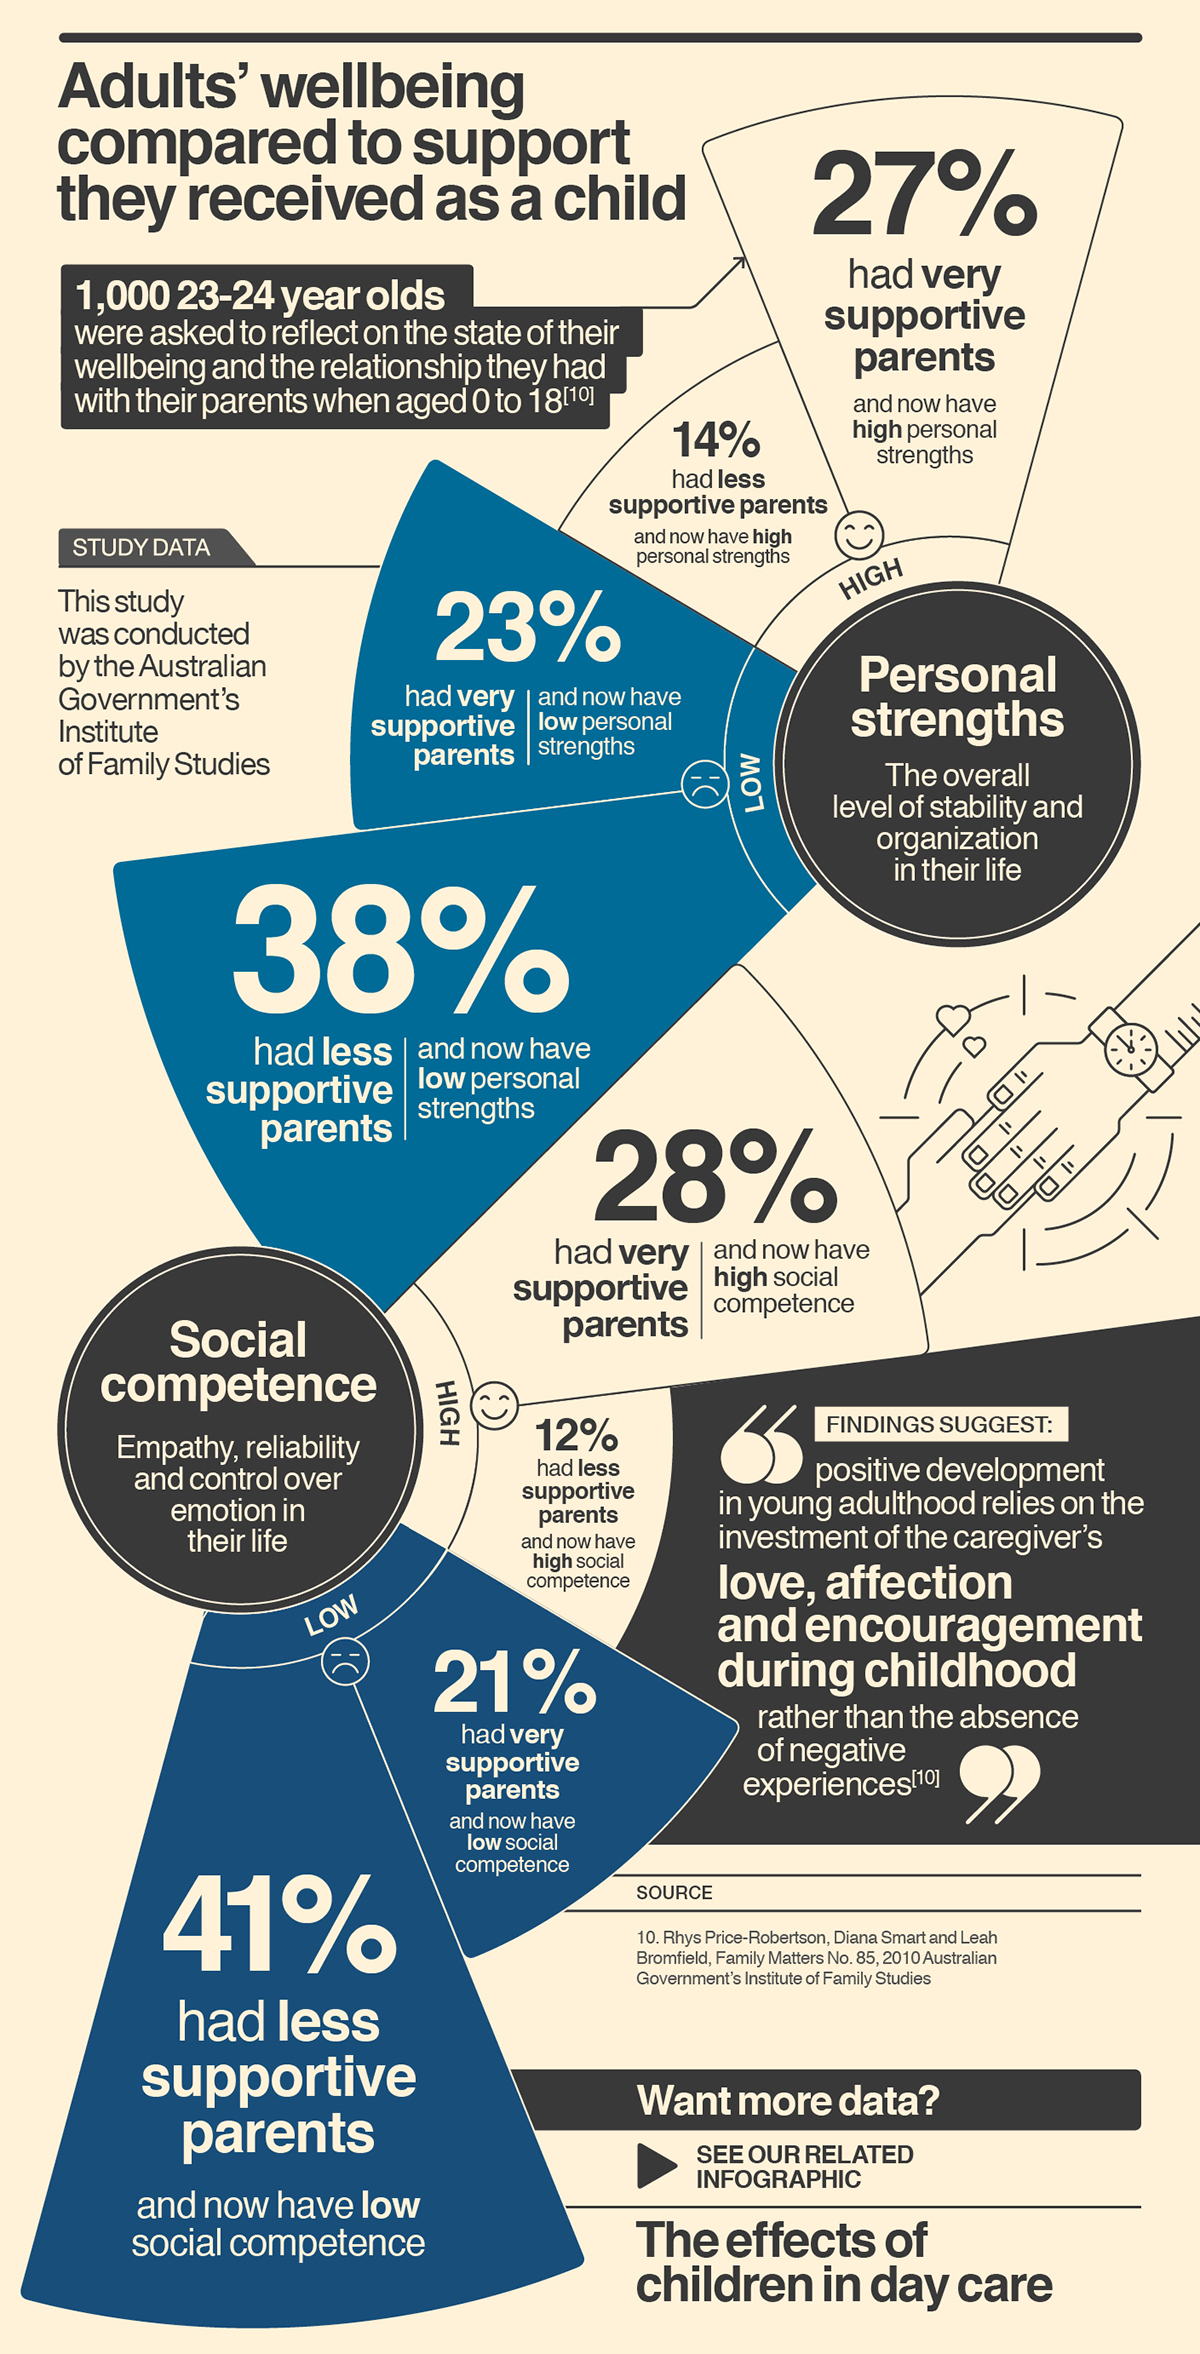 parenting information infographic help tips spanking smacking hitting corporal punishment discipline kids children mother father